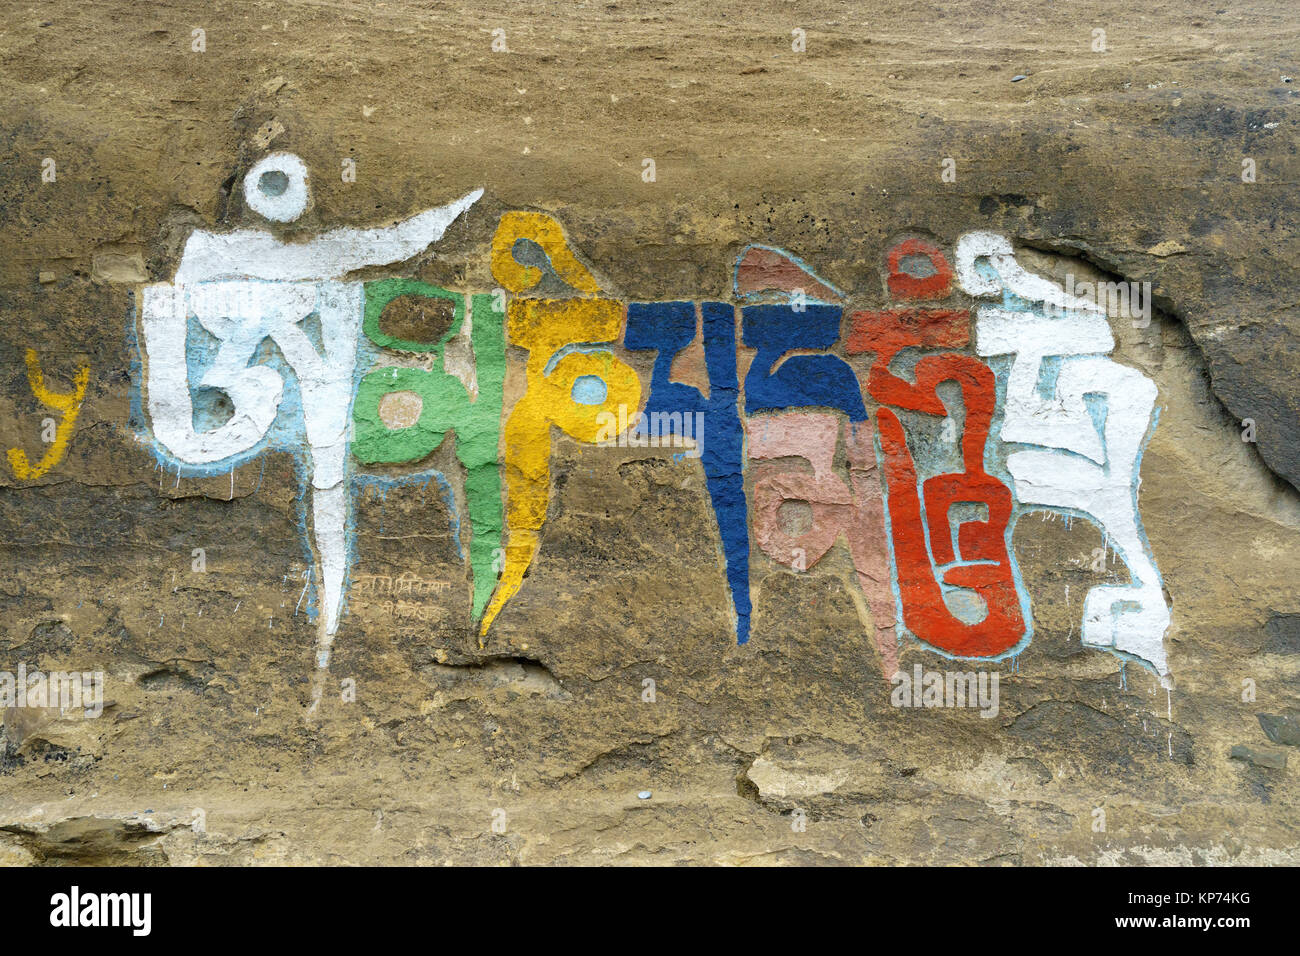 Om mani padme hum Buddhist mantra painted in bright colors on a rock. Upper Mustang region, Nepal. Stock Photo